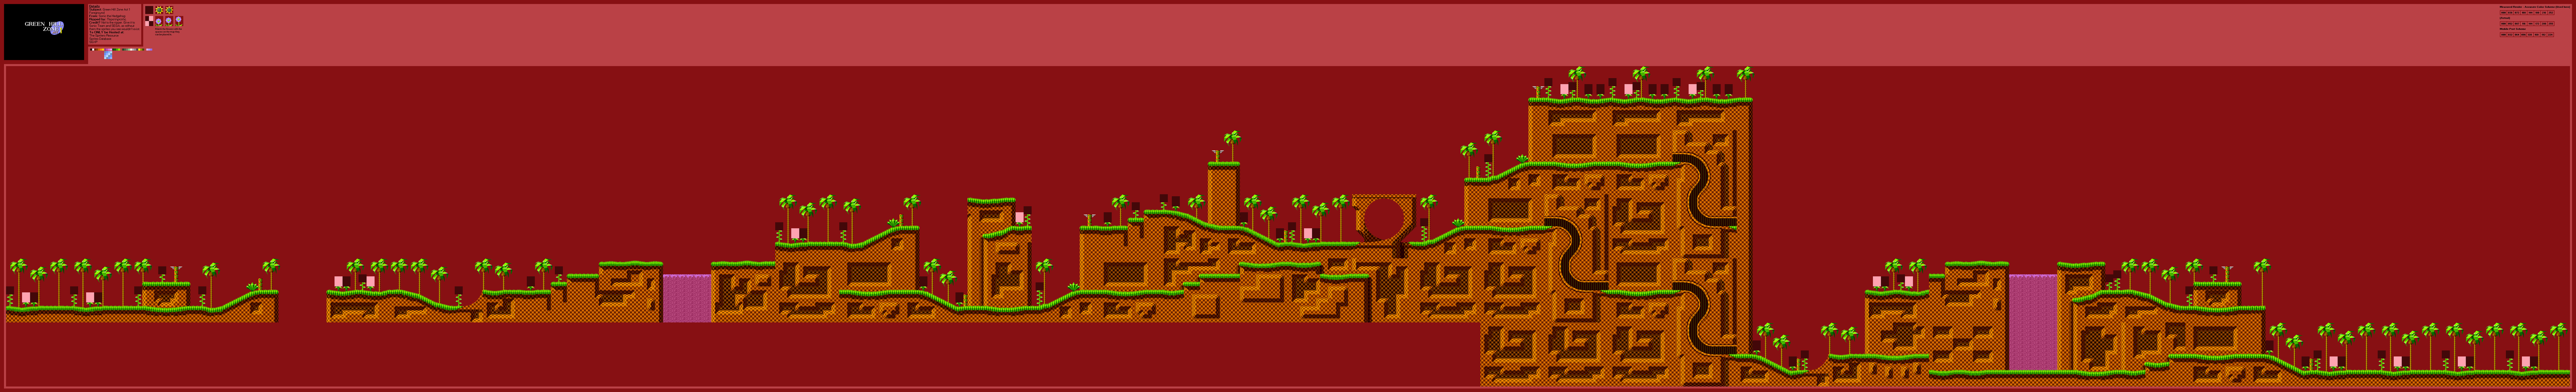 Sonic the Hedgehog // Green Hill Zone // Act 1 - City Prints Map Art -  Touch of Modern